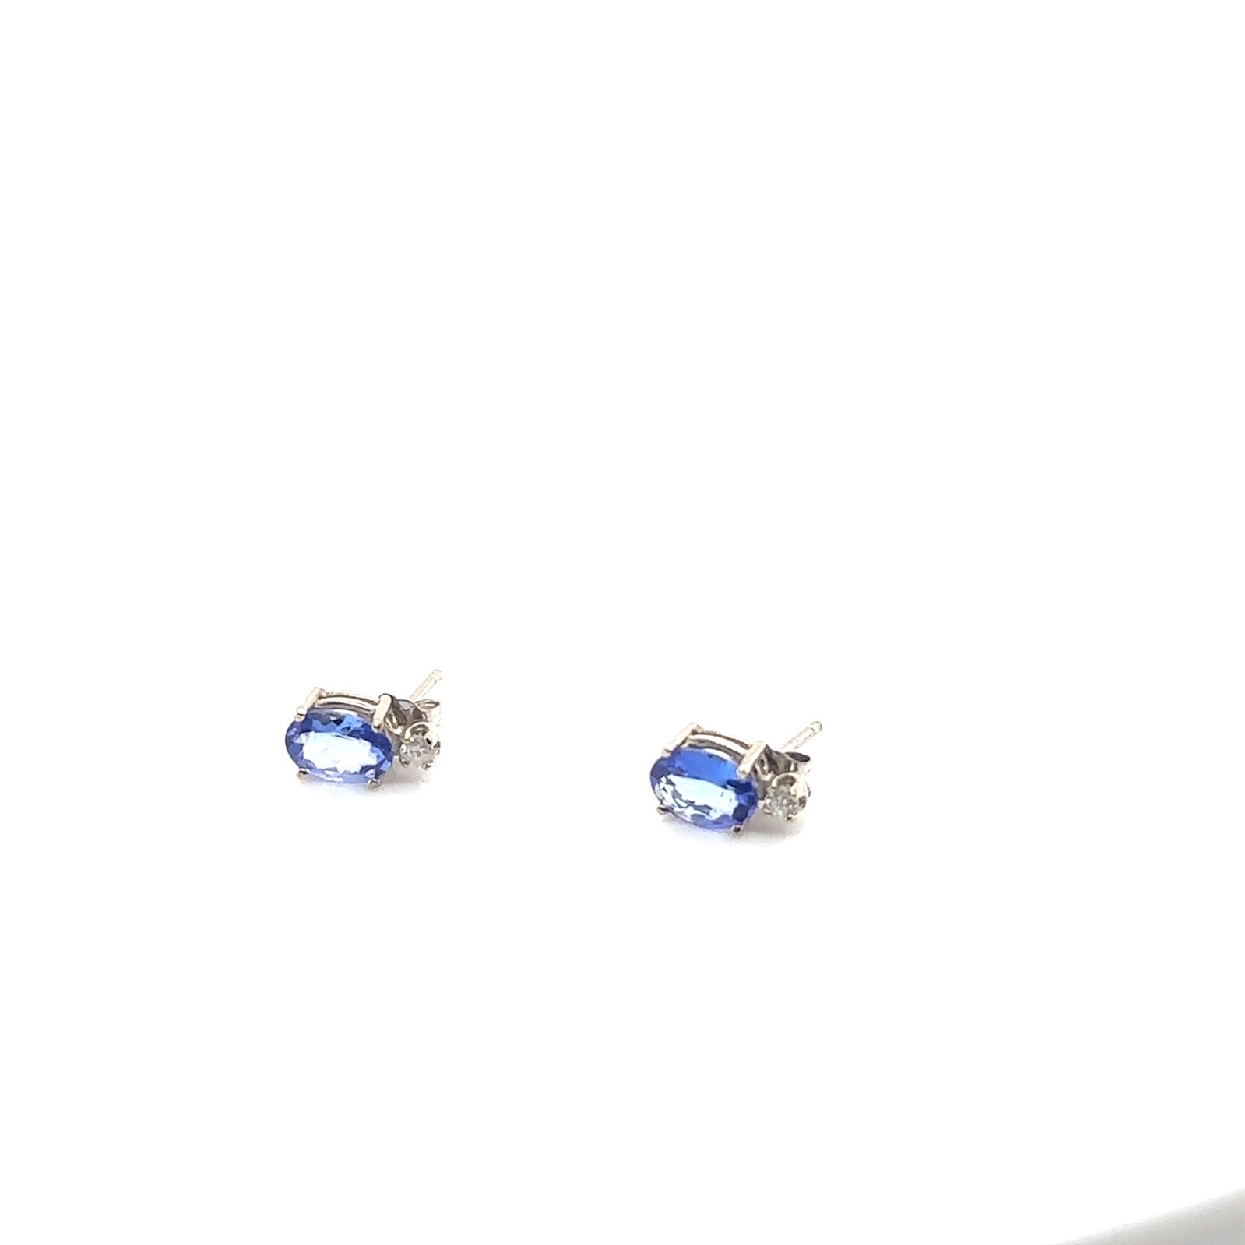 14K White Gold Tanzanite Earrings with Diamond Accents